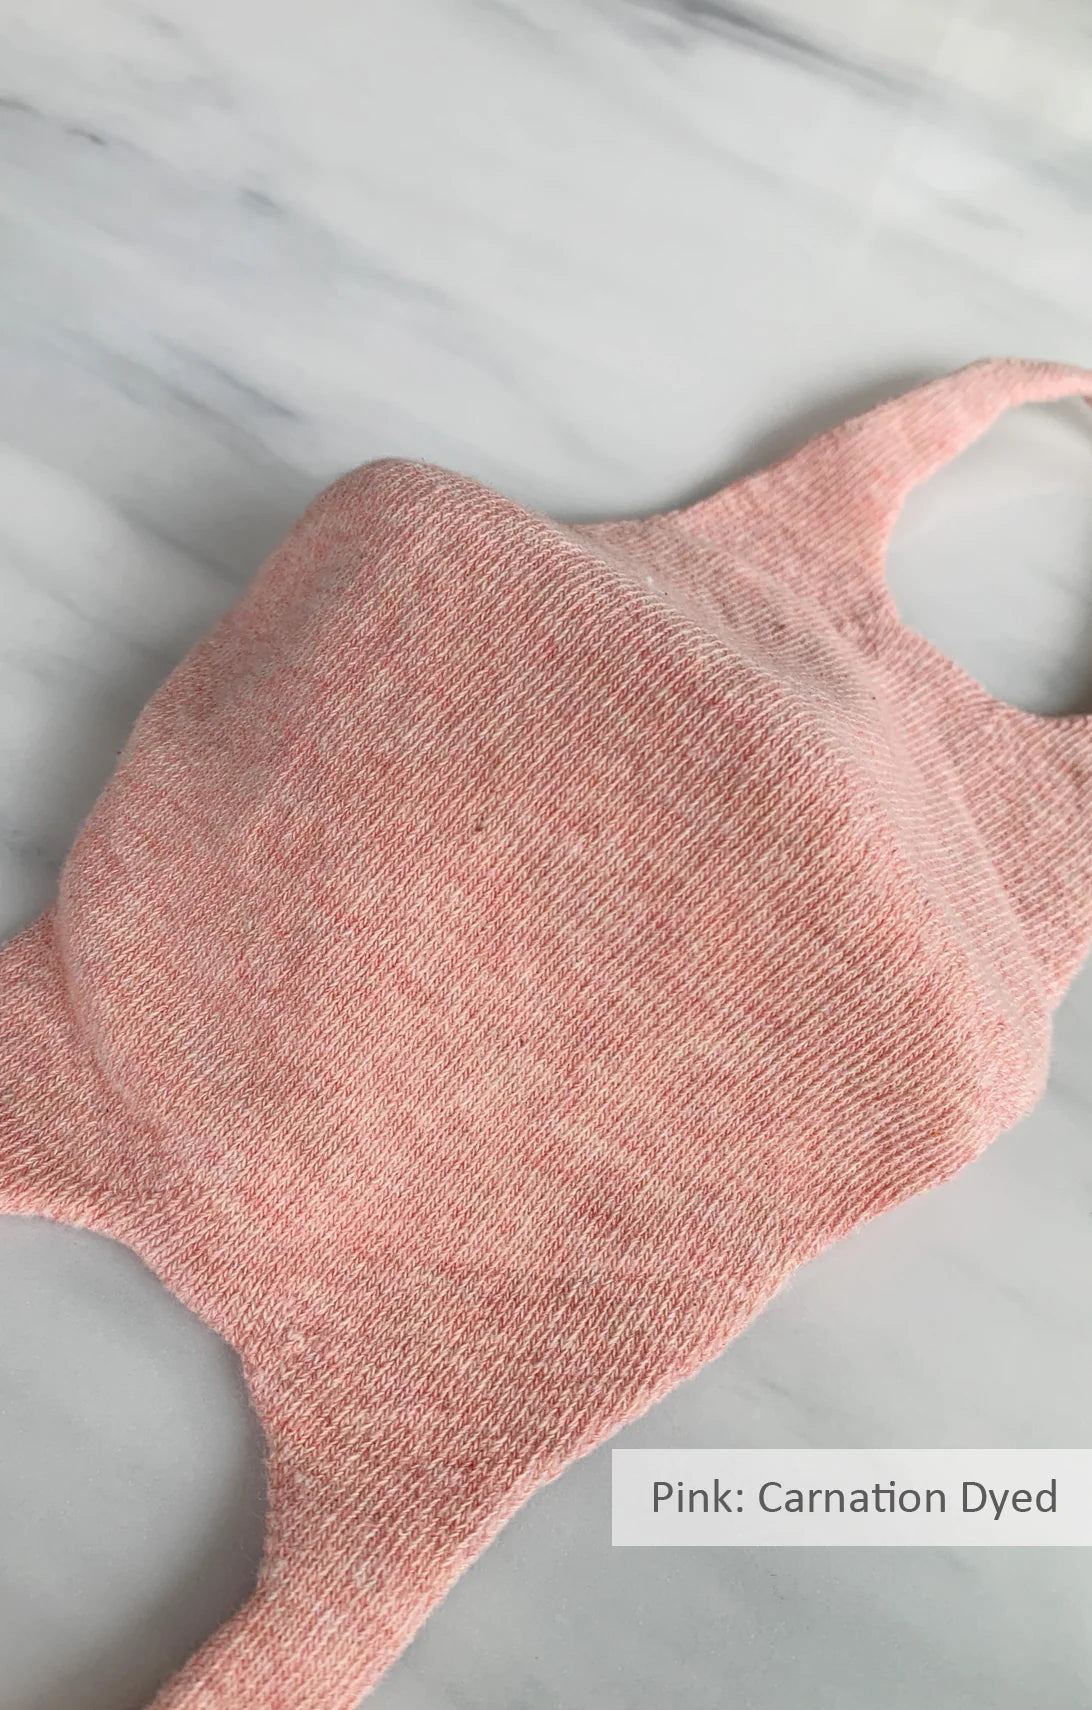 Pink color of Botanical Dyed Organic Cotton Face Mask by Tabbisocks Wellness